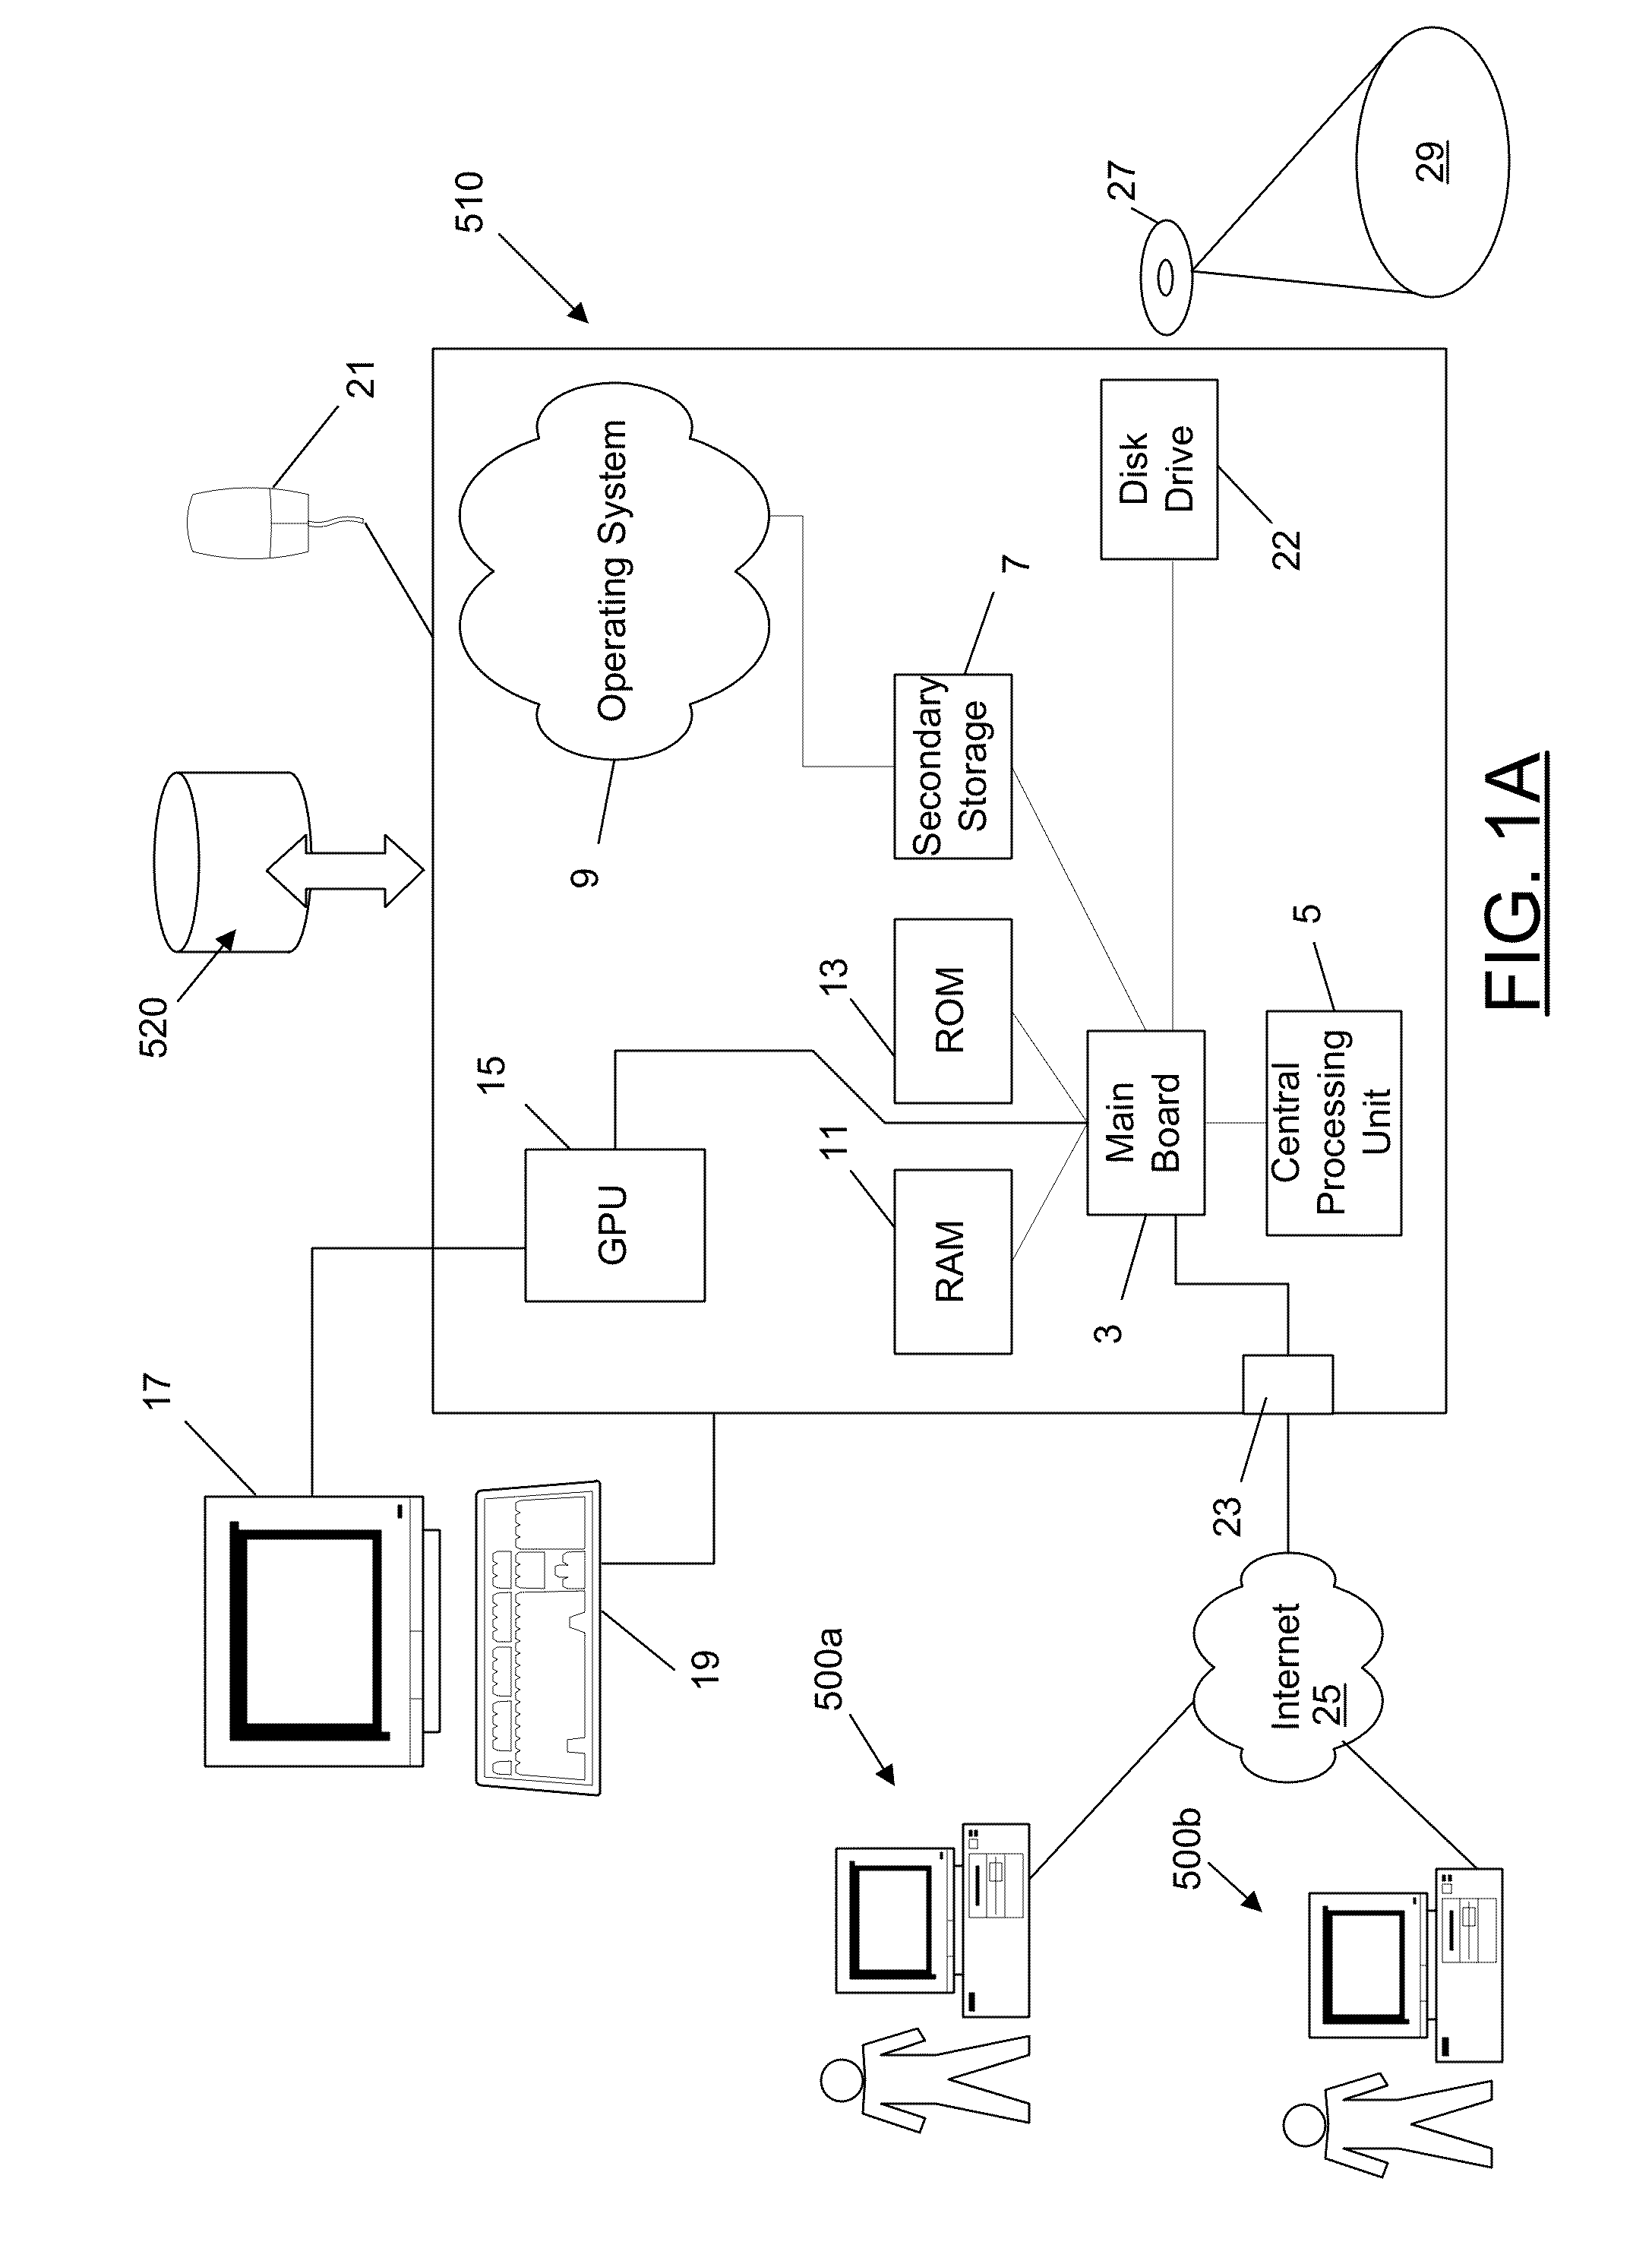 Method for a self organizing load balance in a cloud file server network